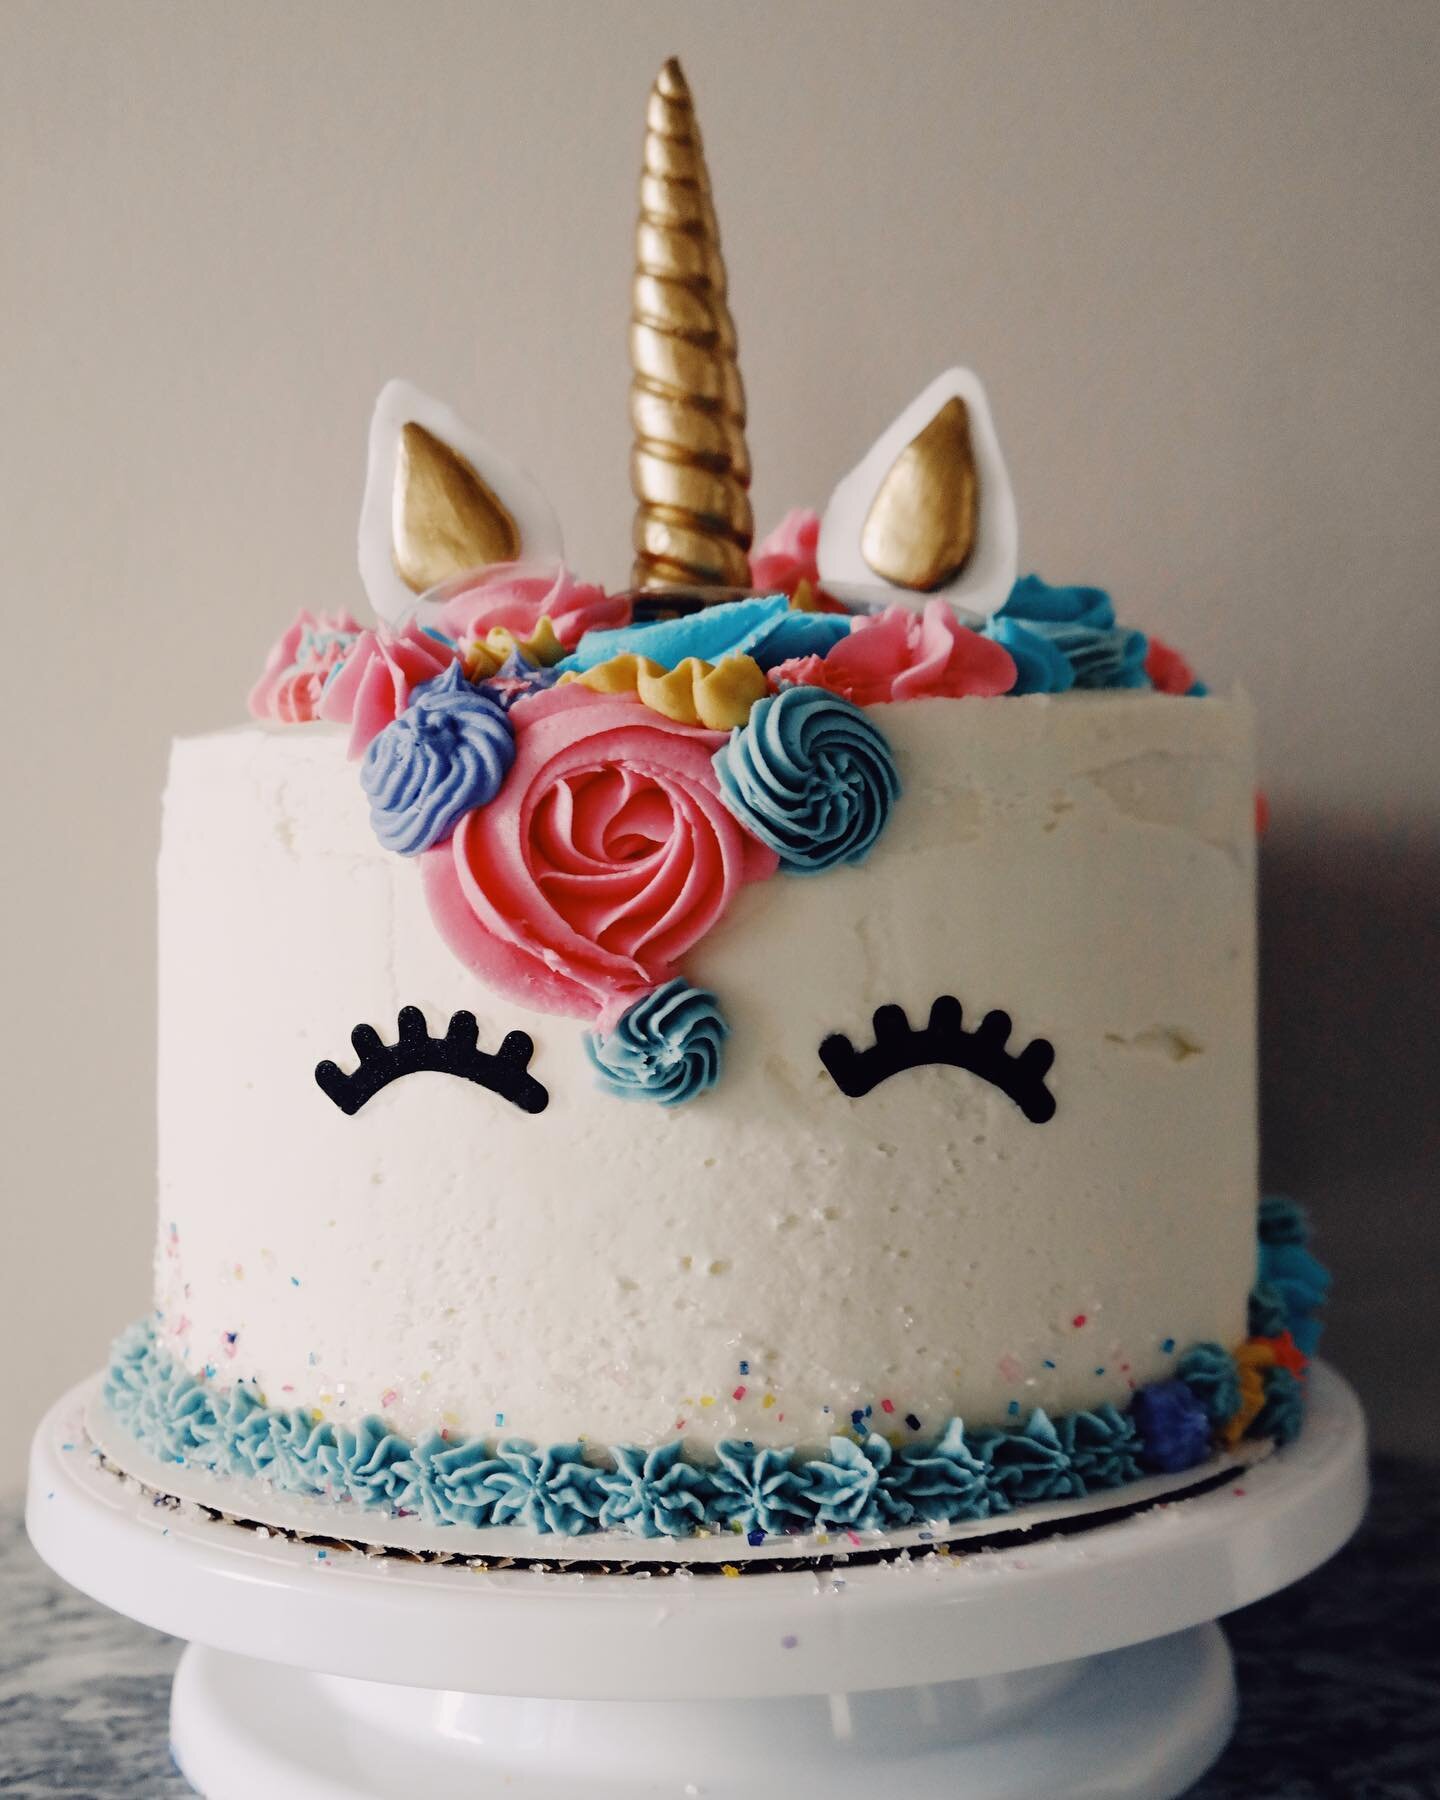 I did an entire photoshoot with this cake because look at it 😍🦄